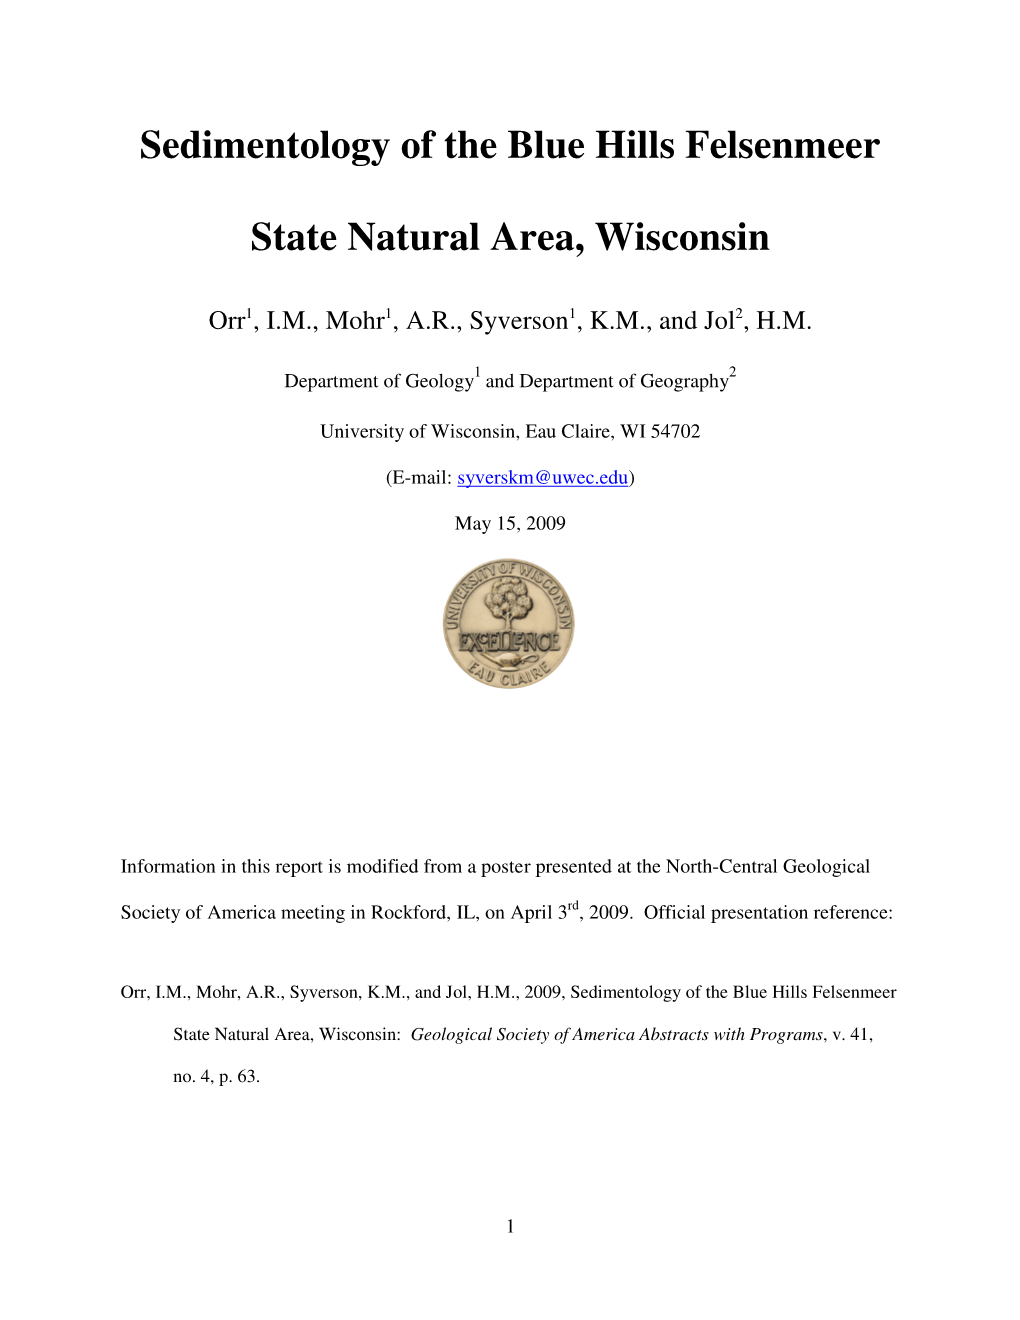 Sedimentology of the Blue Hills Felsenmeer State Natural Area, Wisconsin: Geological Society of America Abstracts with Programs, V